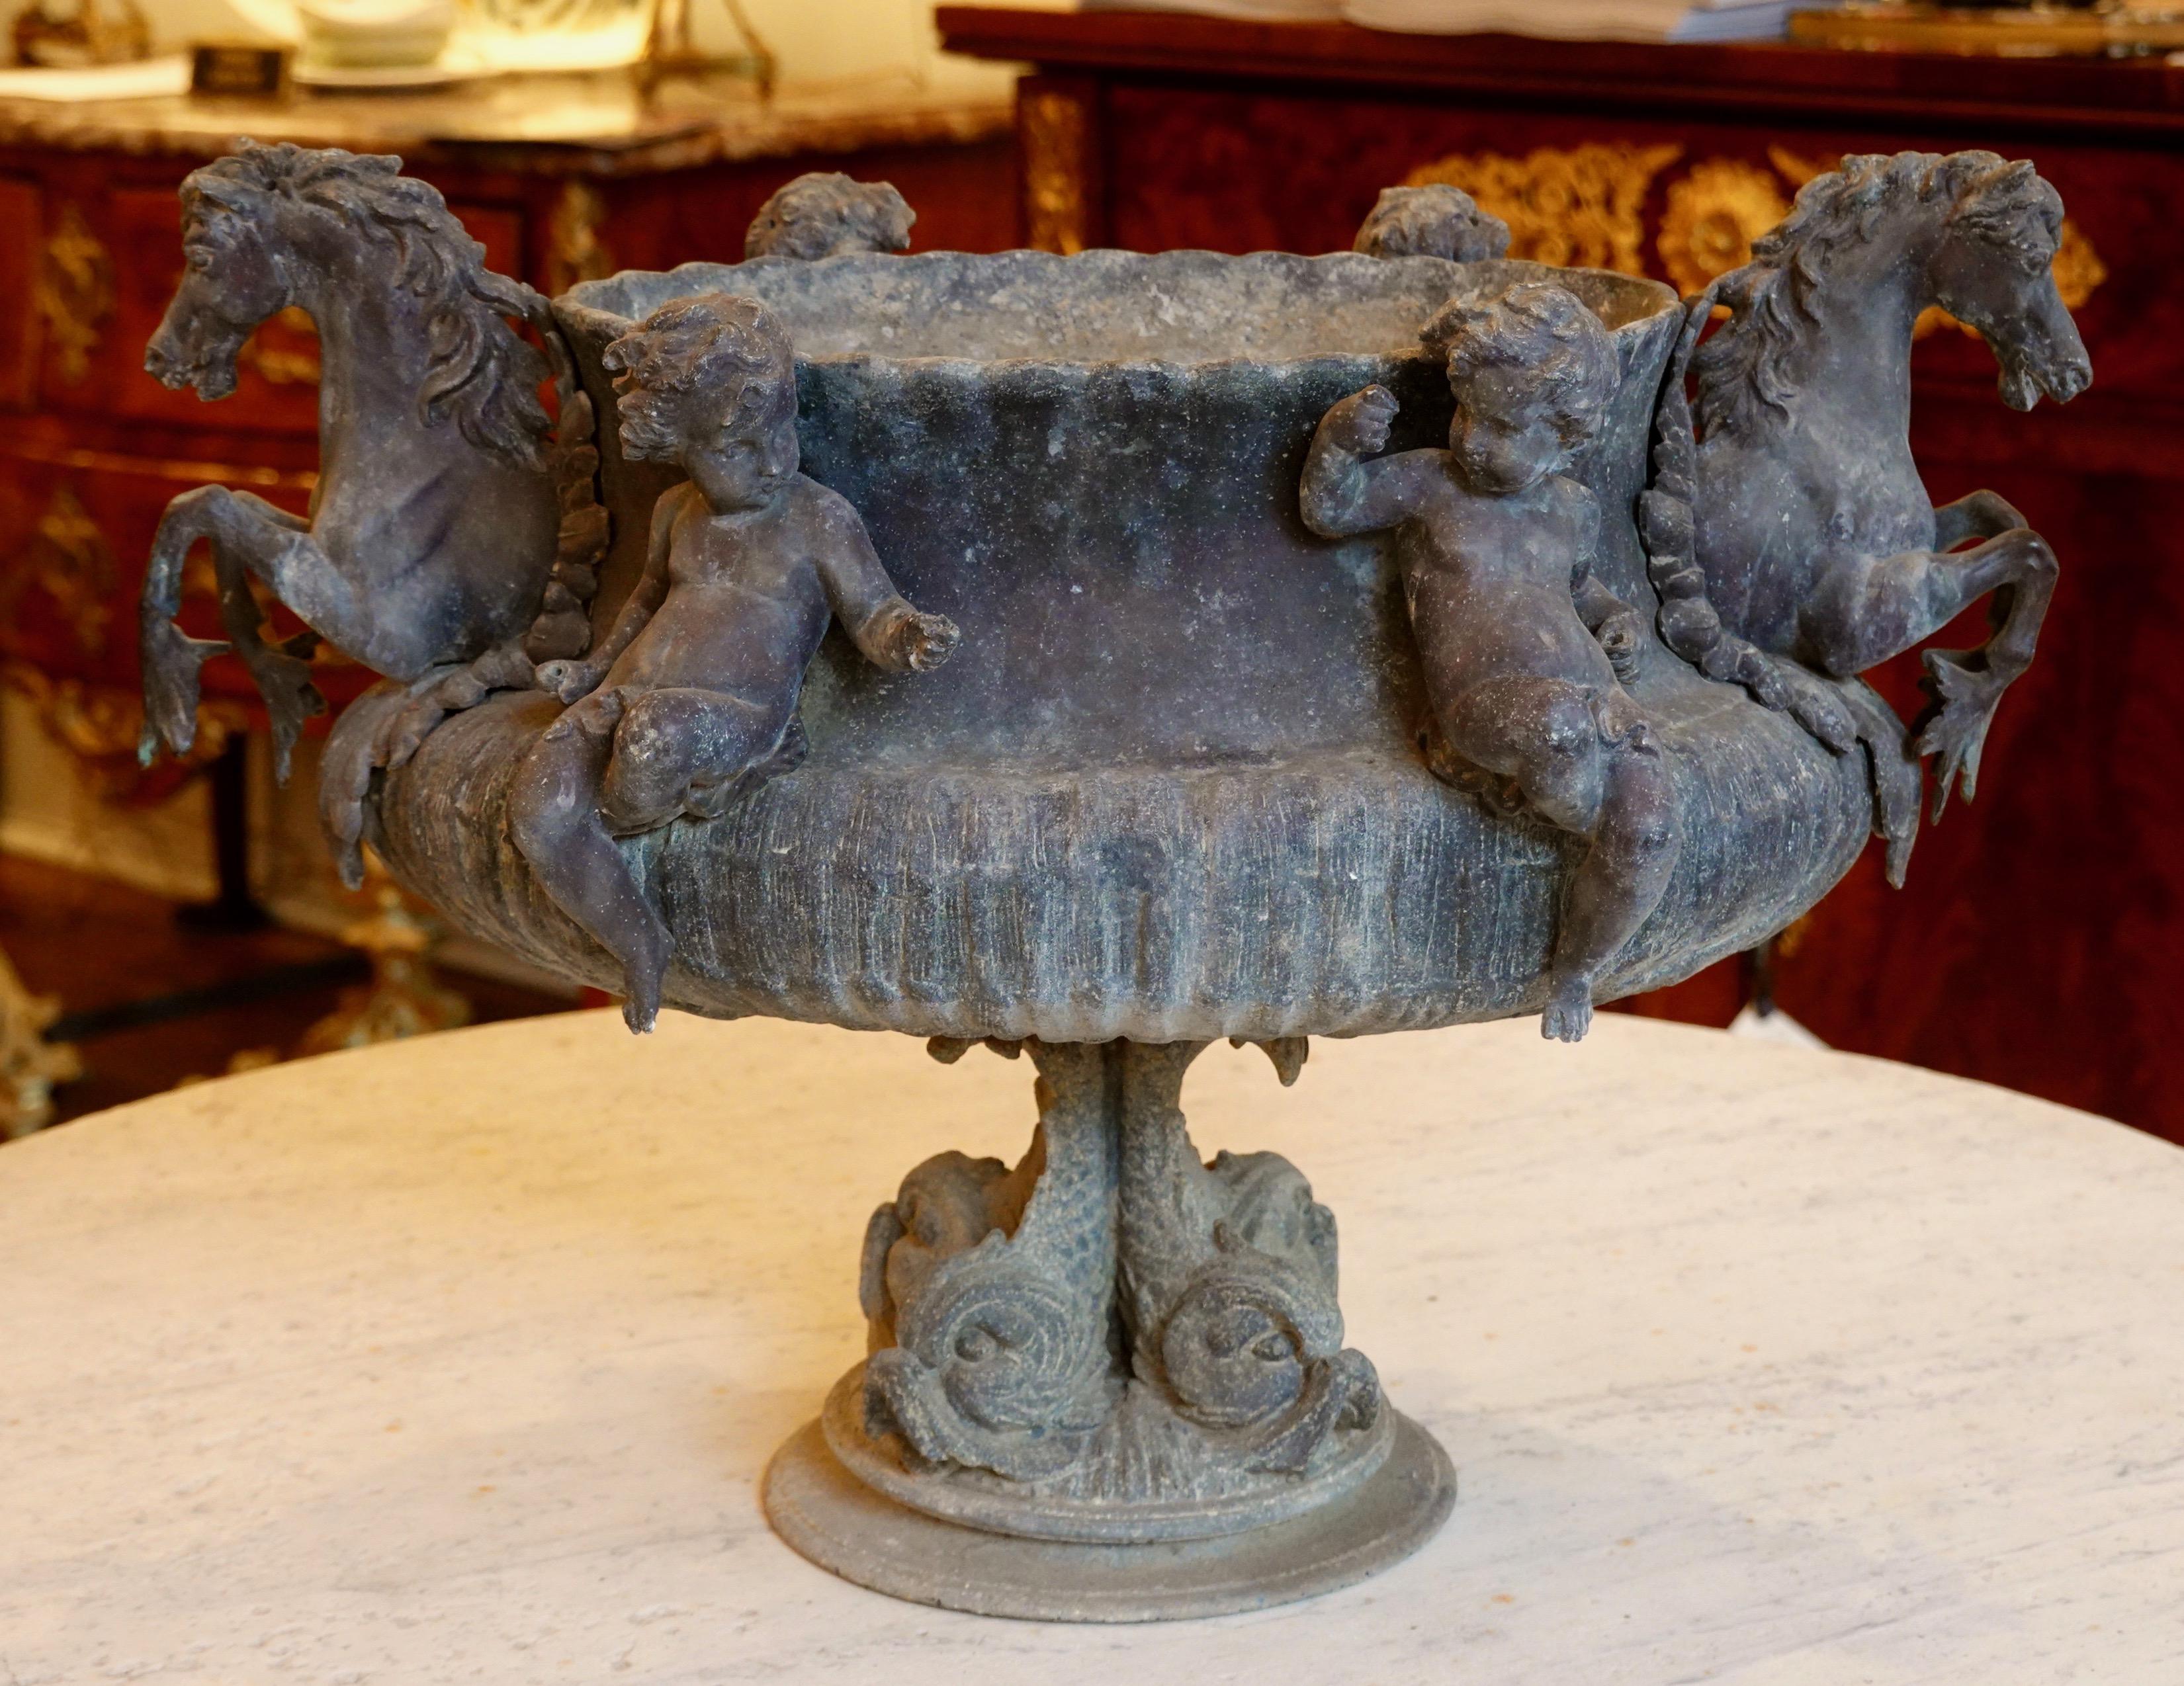 A rare and highly-sculptural French 19th century jardinière with two putti flanking each side, a hippocampus (mythical sea horse, which is typically depicted as having the upper body of a horse and lower body of a fish) decorating each end,